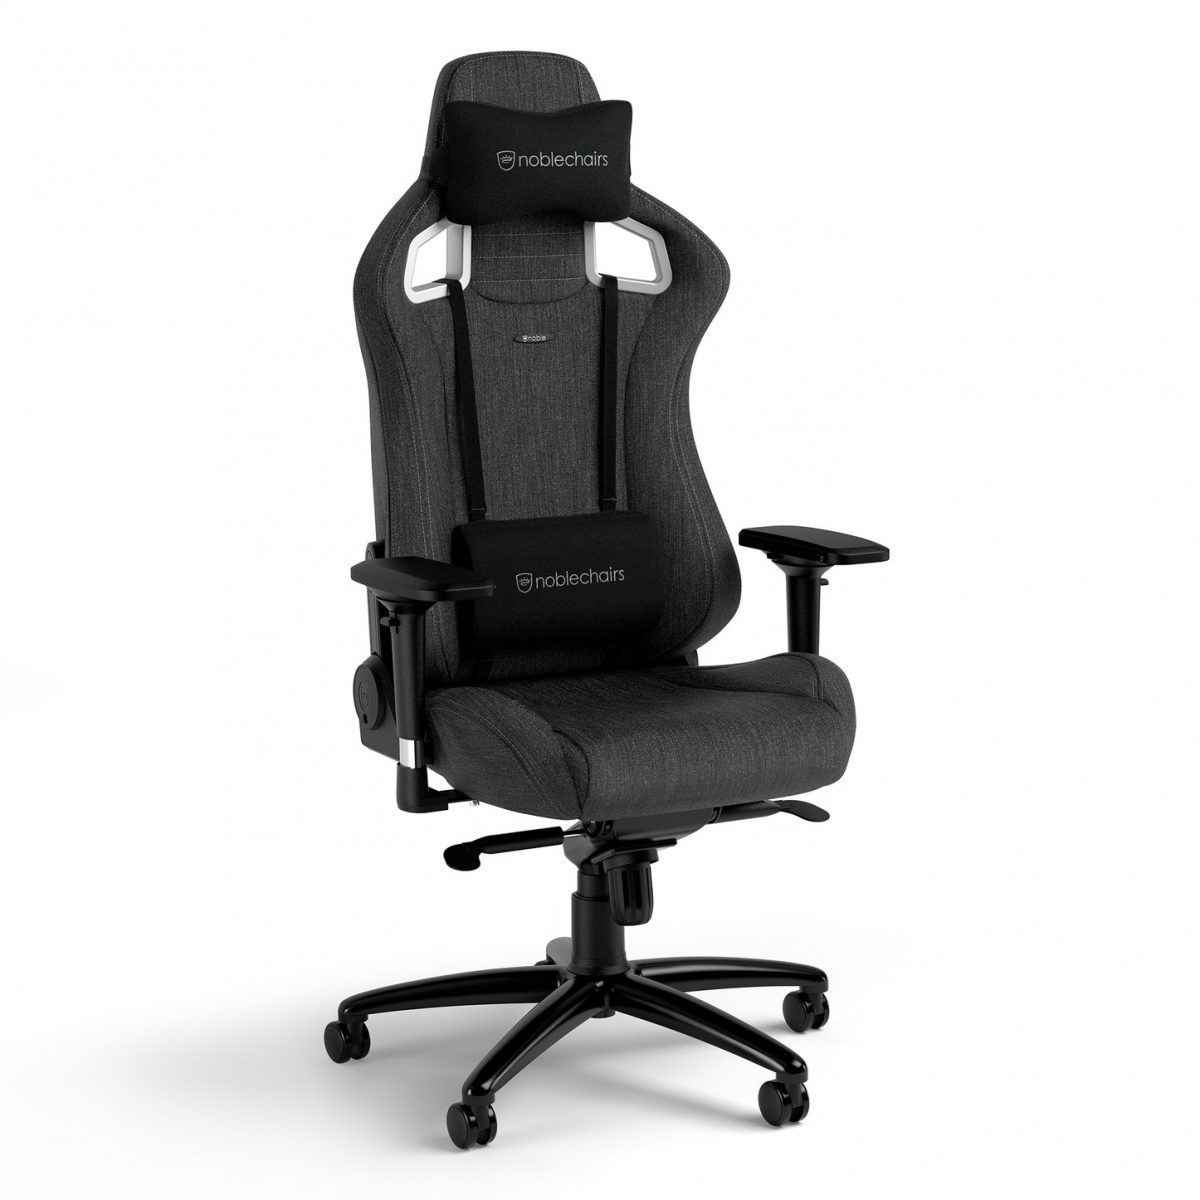 noblechairs EPIC Gaming Chair Fabric Breathable, 4D armrests, 60mm casters - Anthracite Grey - CASEKING 2.35.63.01.012